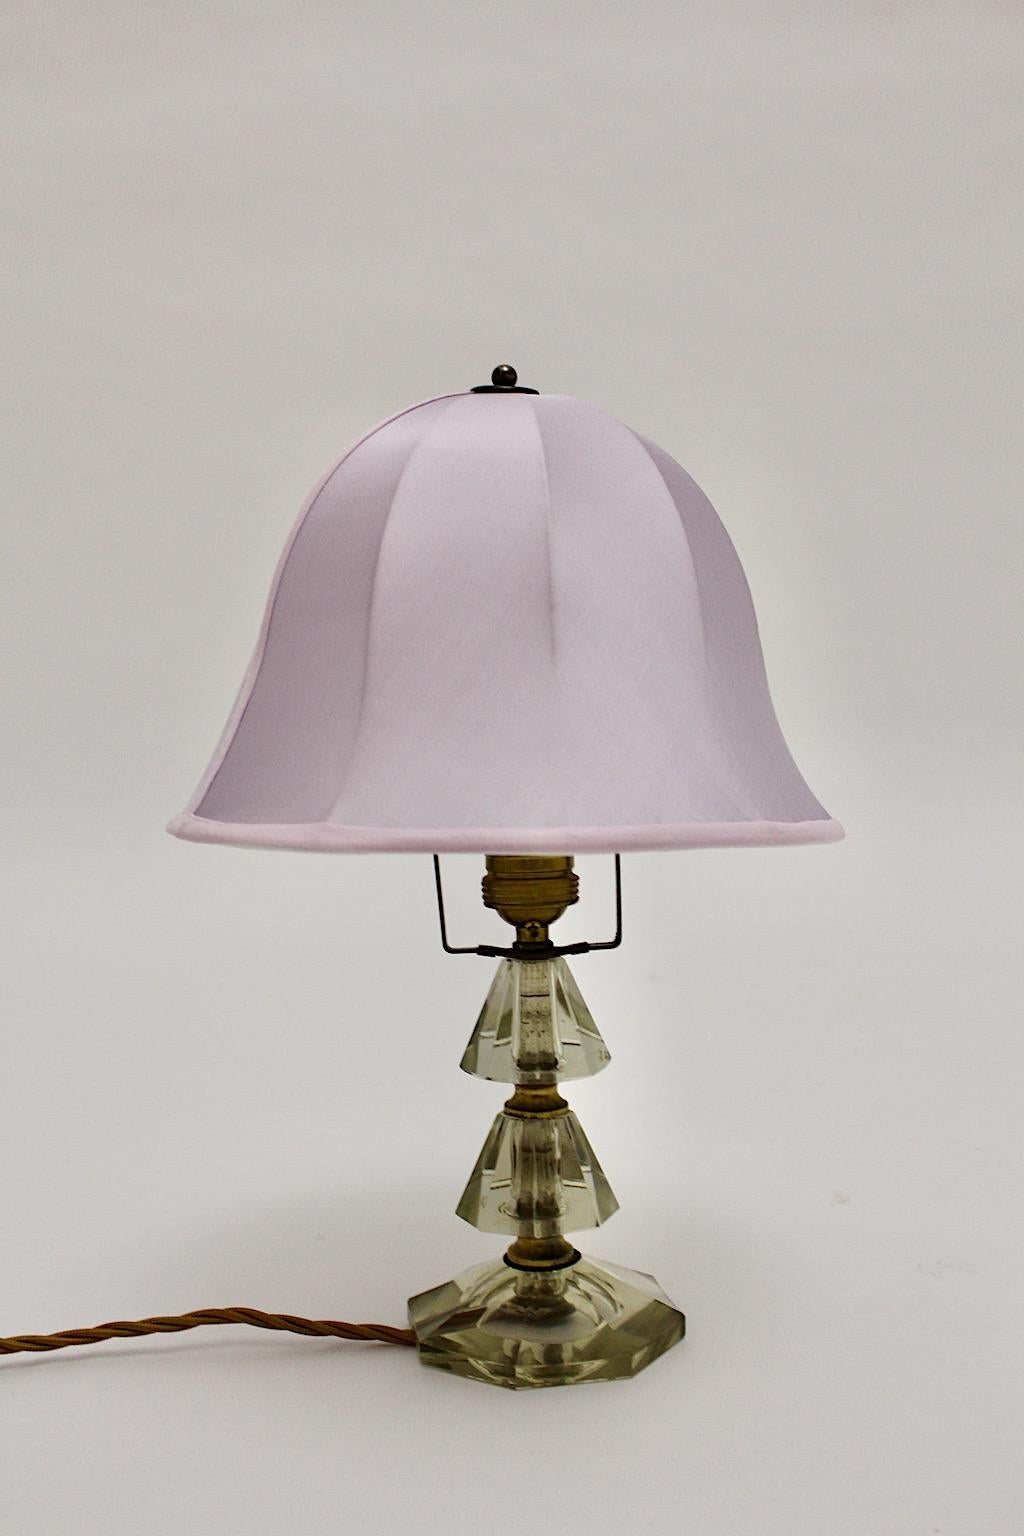 Mid Century Modern vintage table lamp from cut glass and brass by Bakalowits & Söhne 1950s Vienna.
While the table lamp base shows geometric elements from cut clear glass, the lamp shade bell like is recently custom made by hand in dusty pink pastel